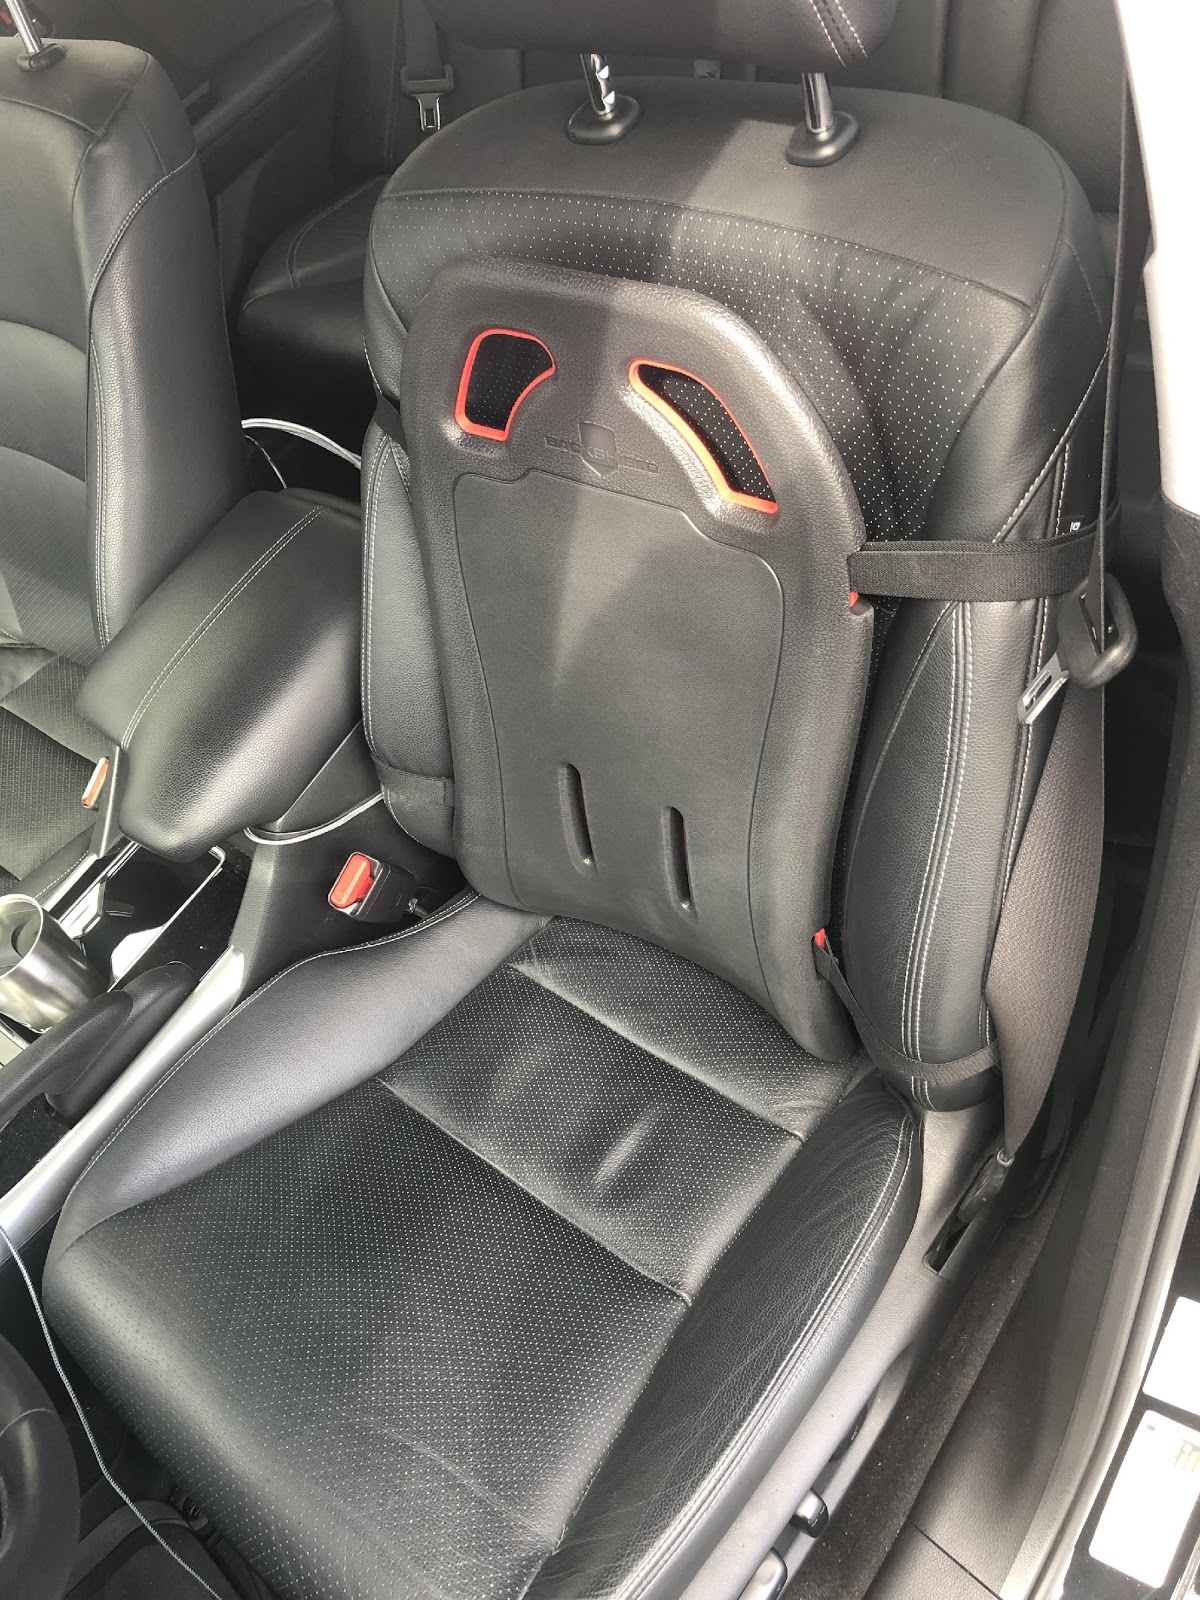 Best Lumbar Support For Car? An Uber Driver Reviews The BackShield